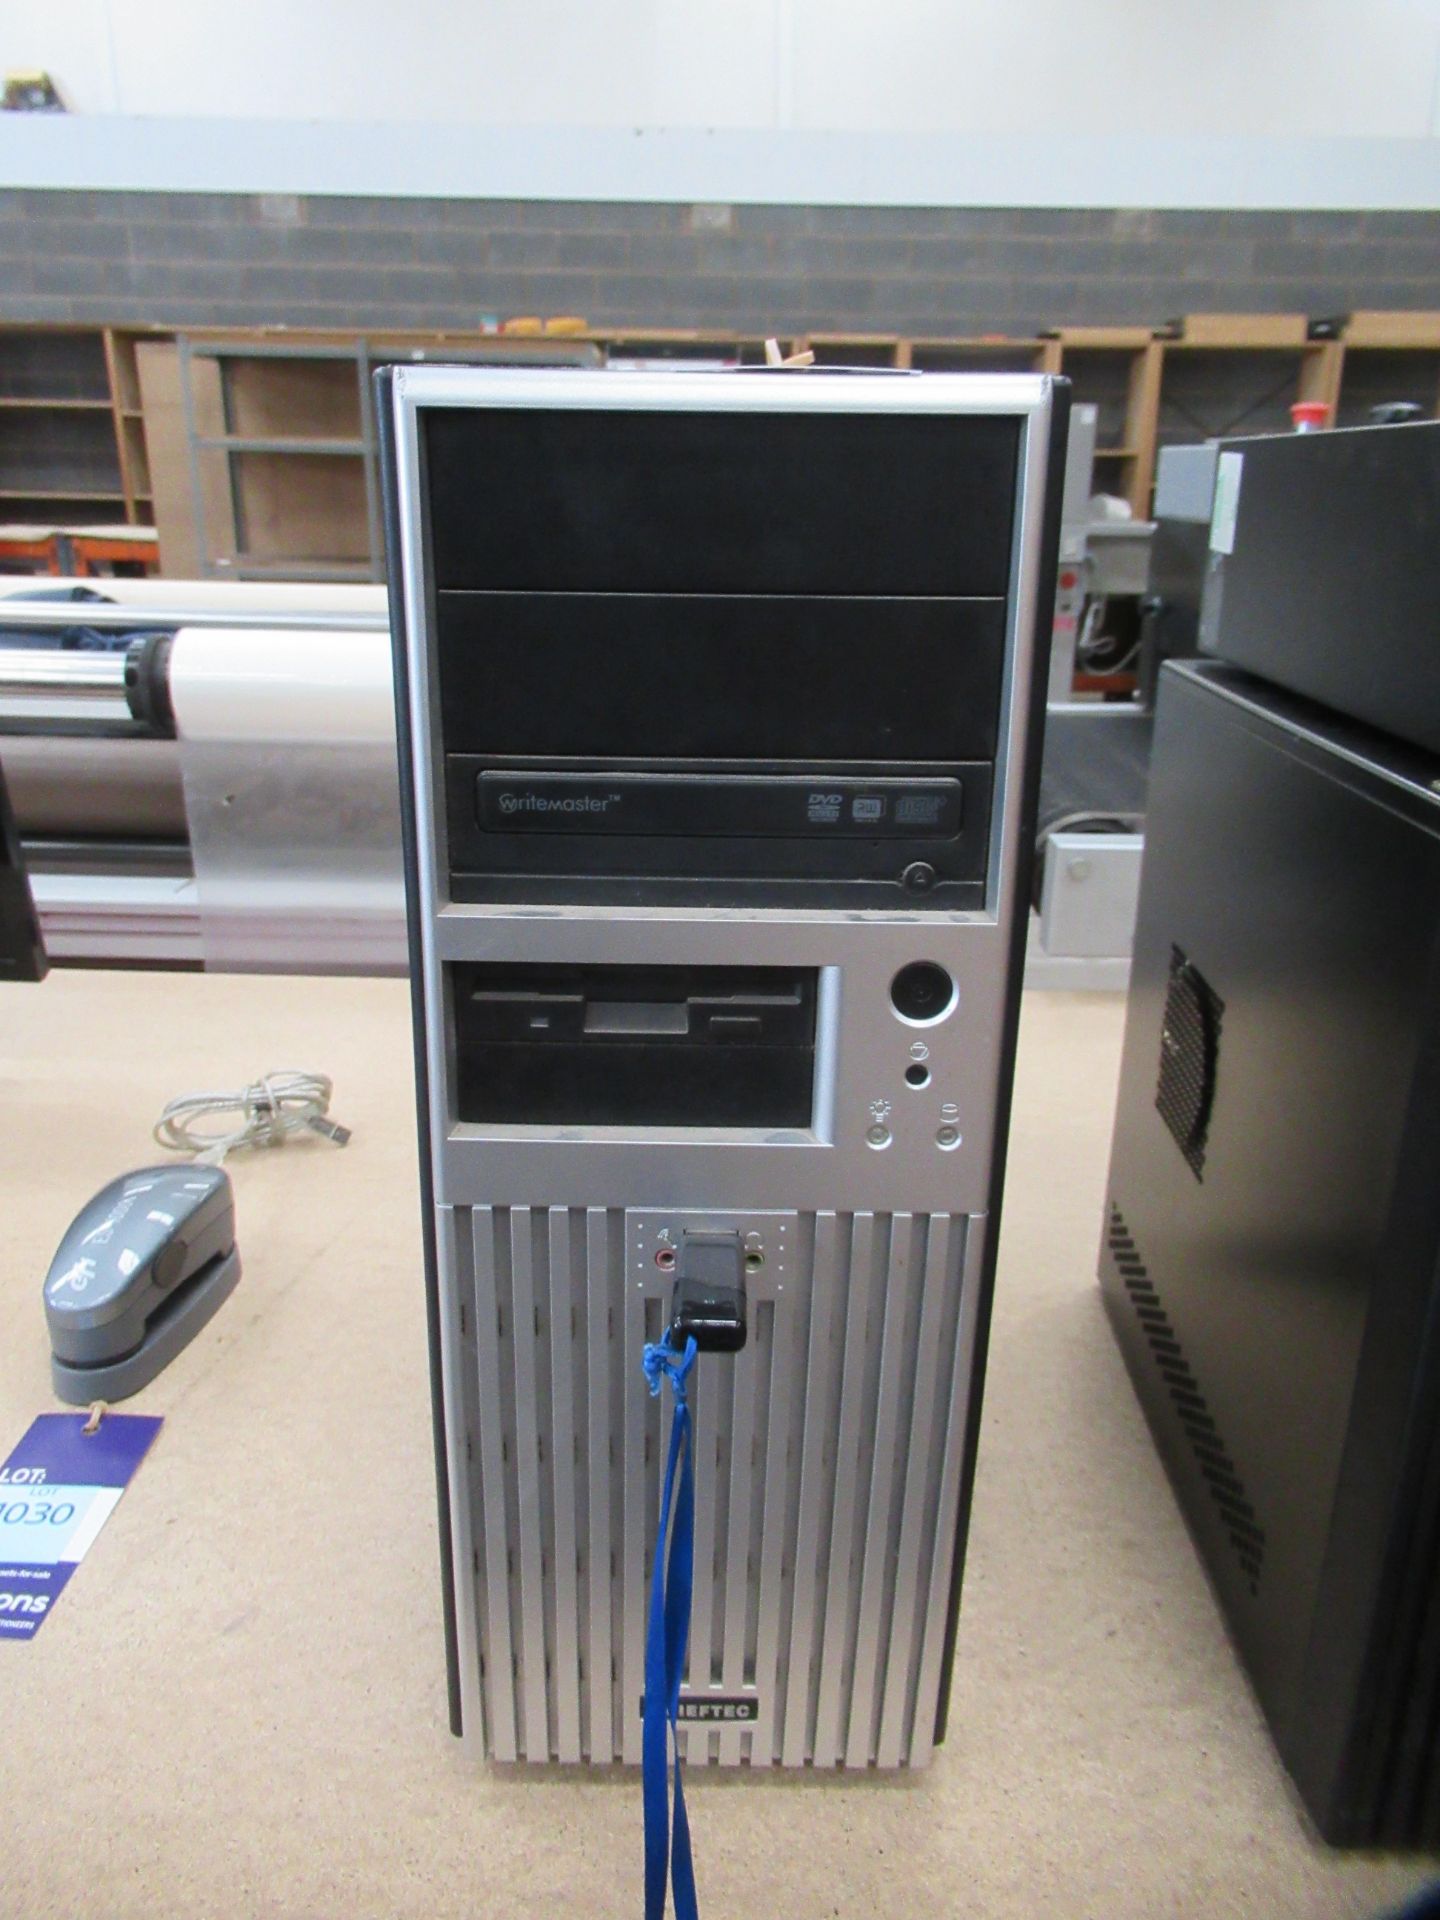 Chieftec Writemaster PC Tower (hard drive removed)